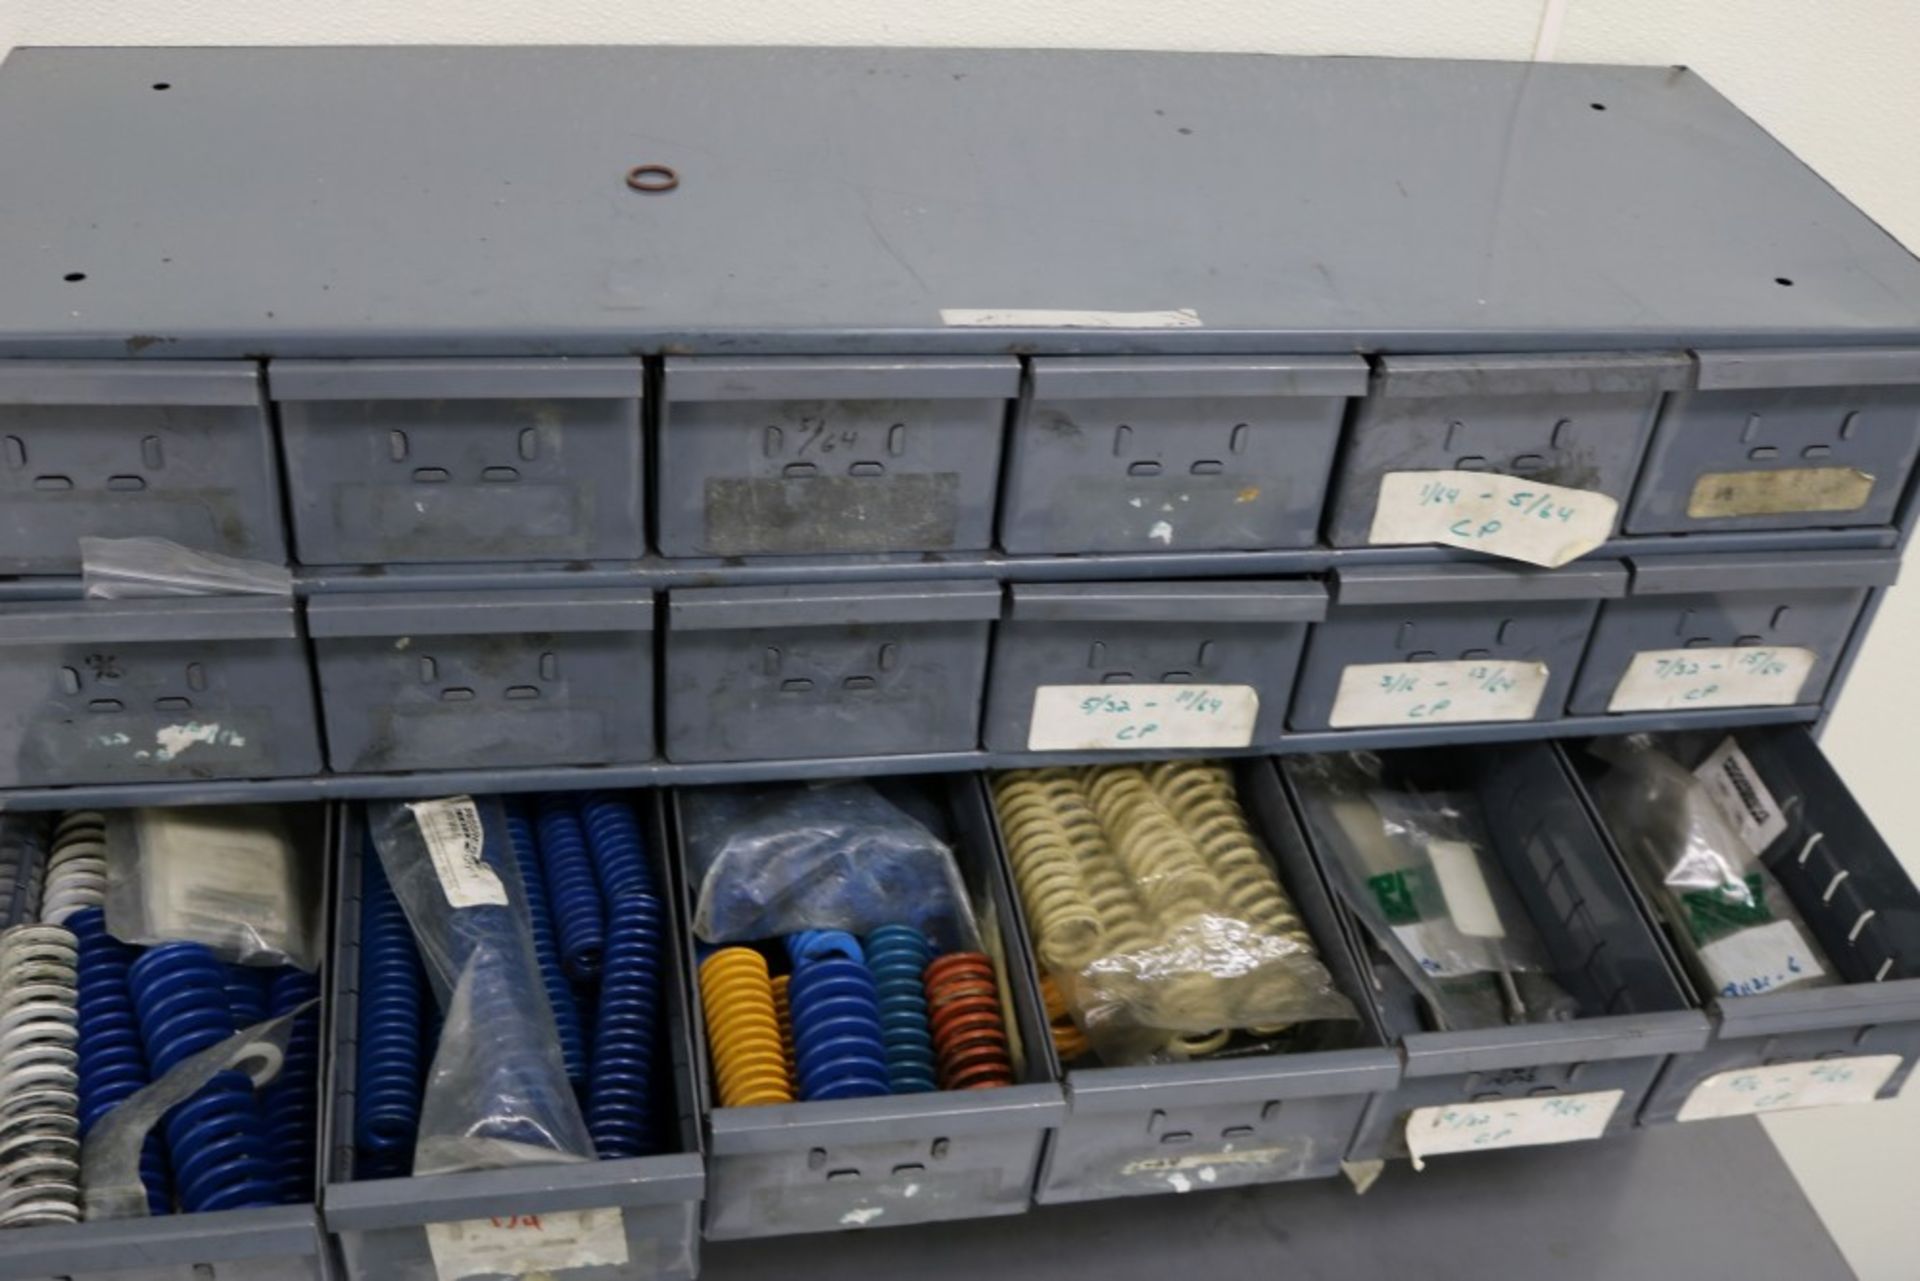 24 Bin Organizer Full of Various Sized Die Springs and Return Pins for Injection Molds - Image 5 of 9